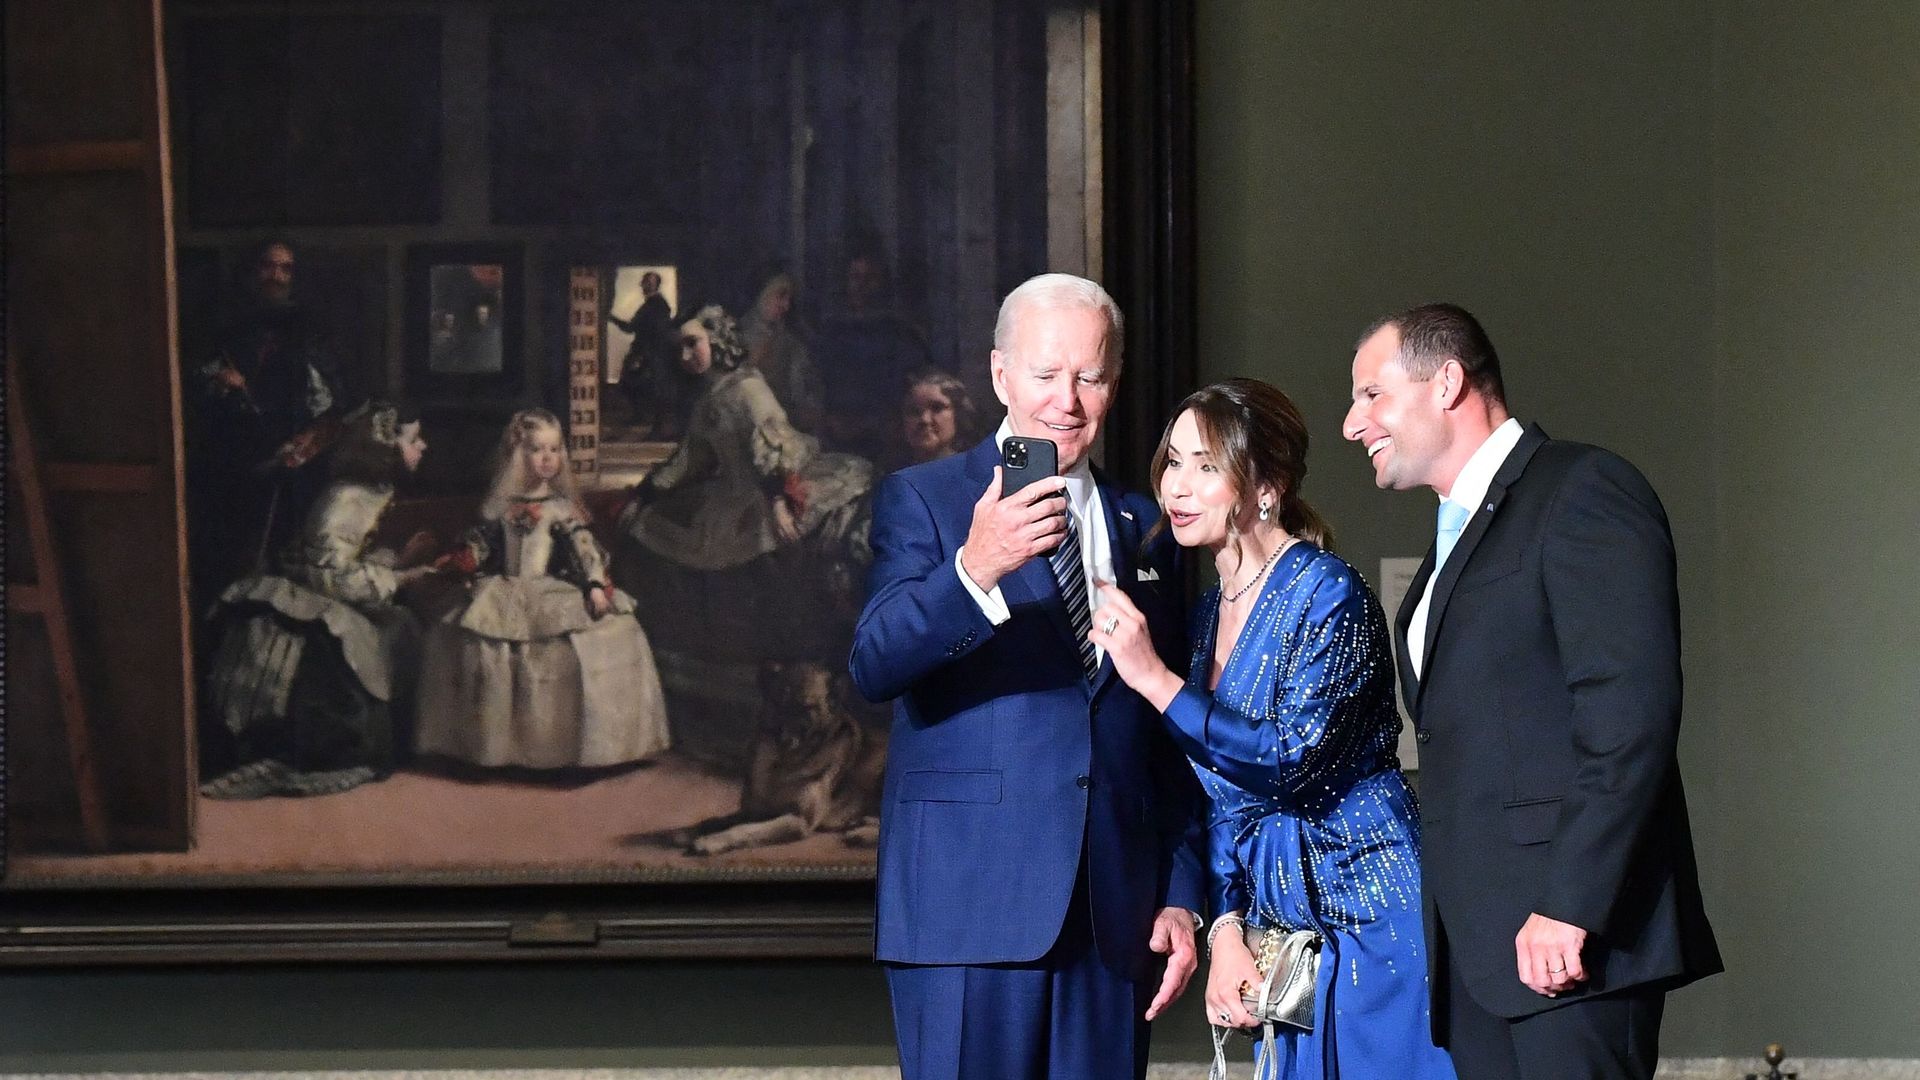 Biden with the Prime Minister of Malta and his wife